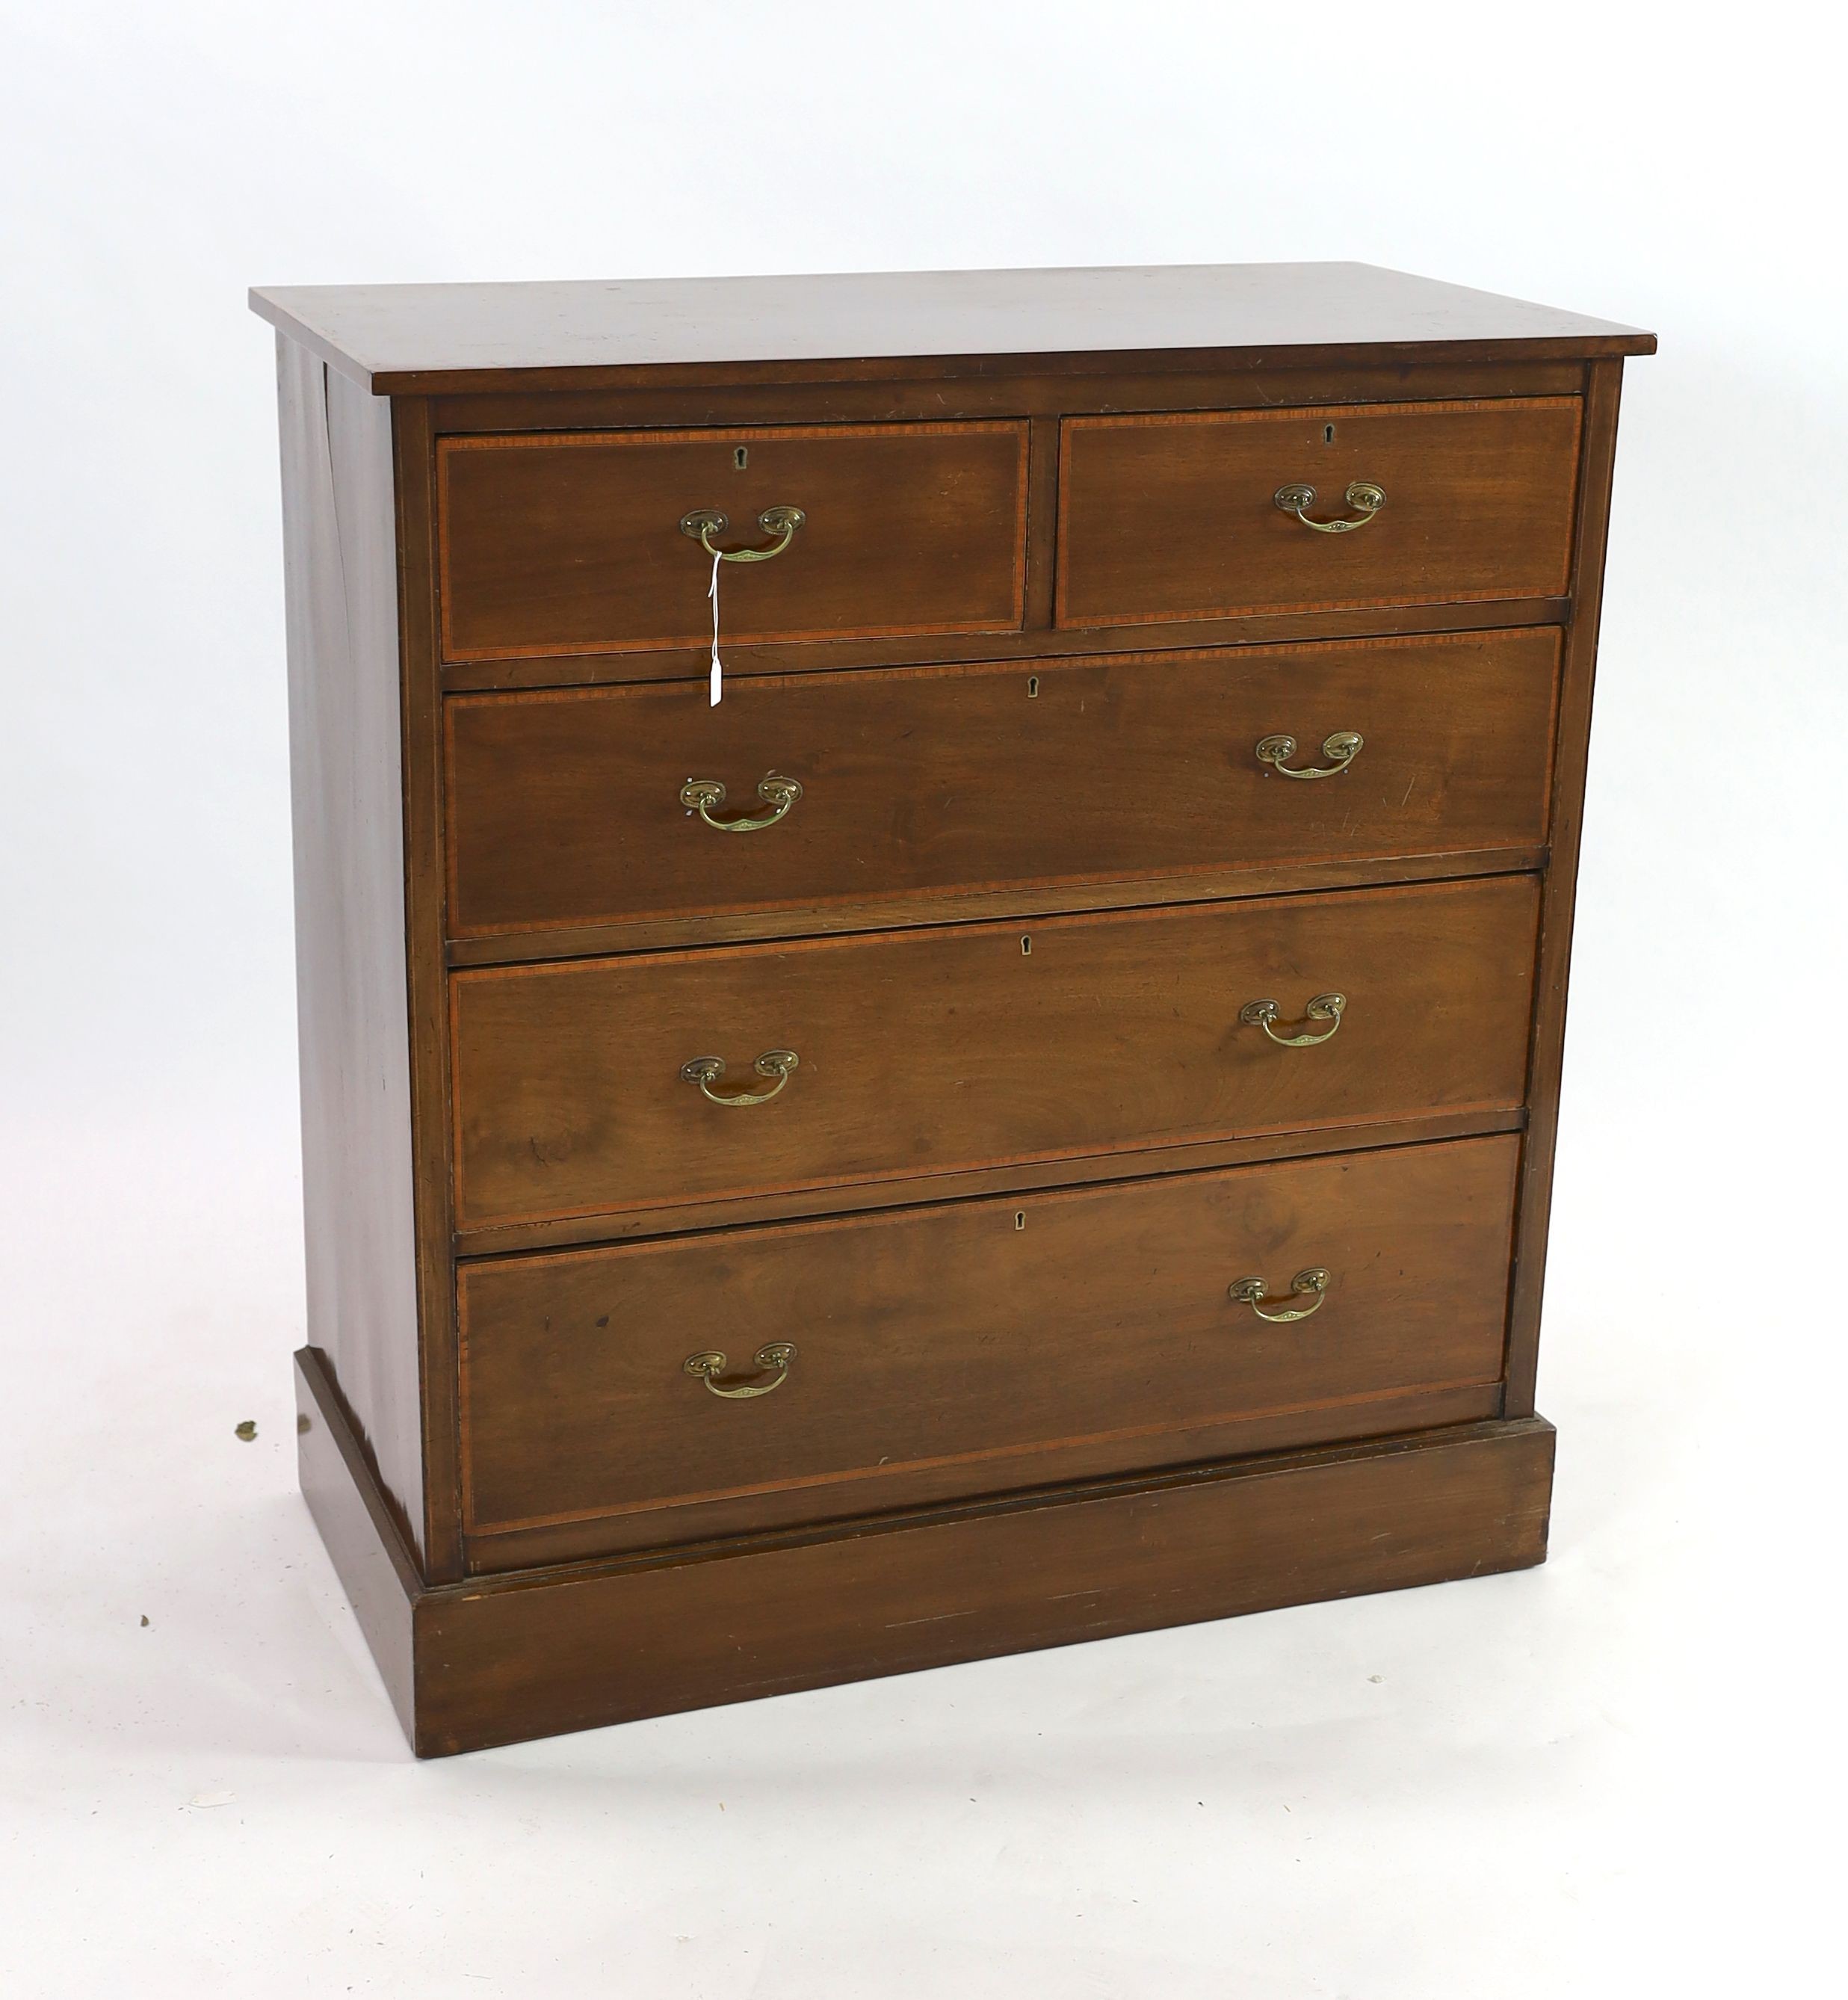 An Edwardian satinwood banded mahogany five drawer chest, width 107cm depth 54cm height 114cm